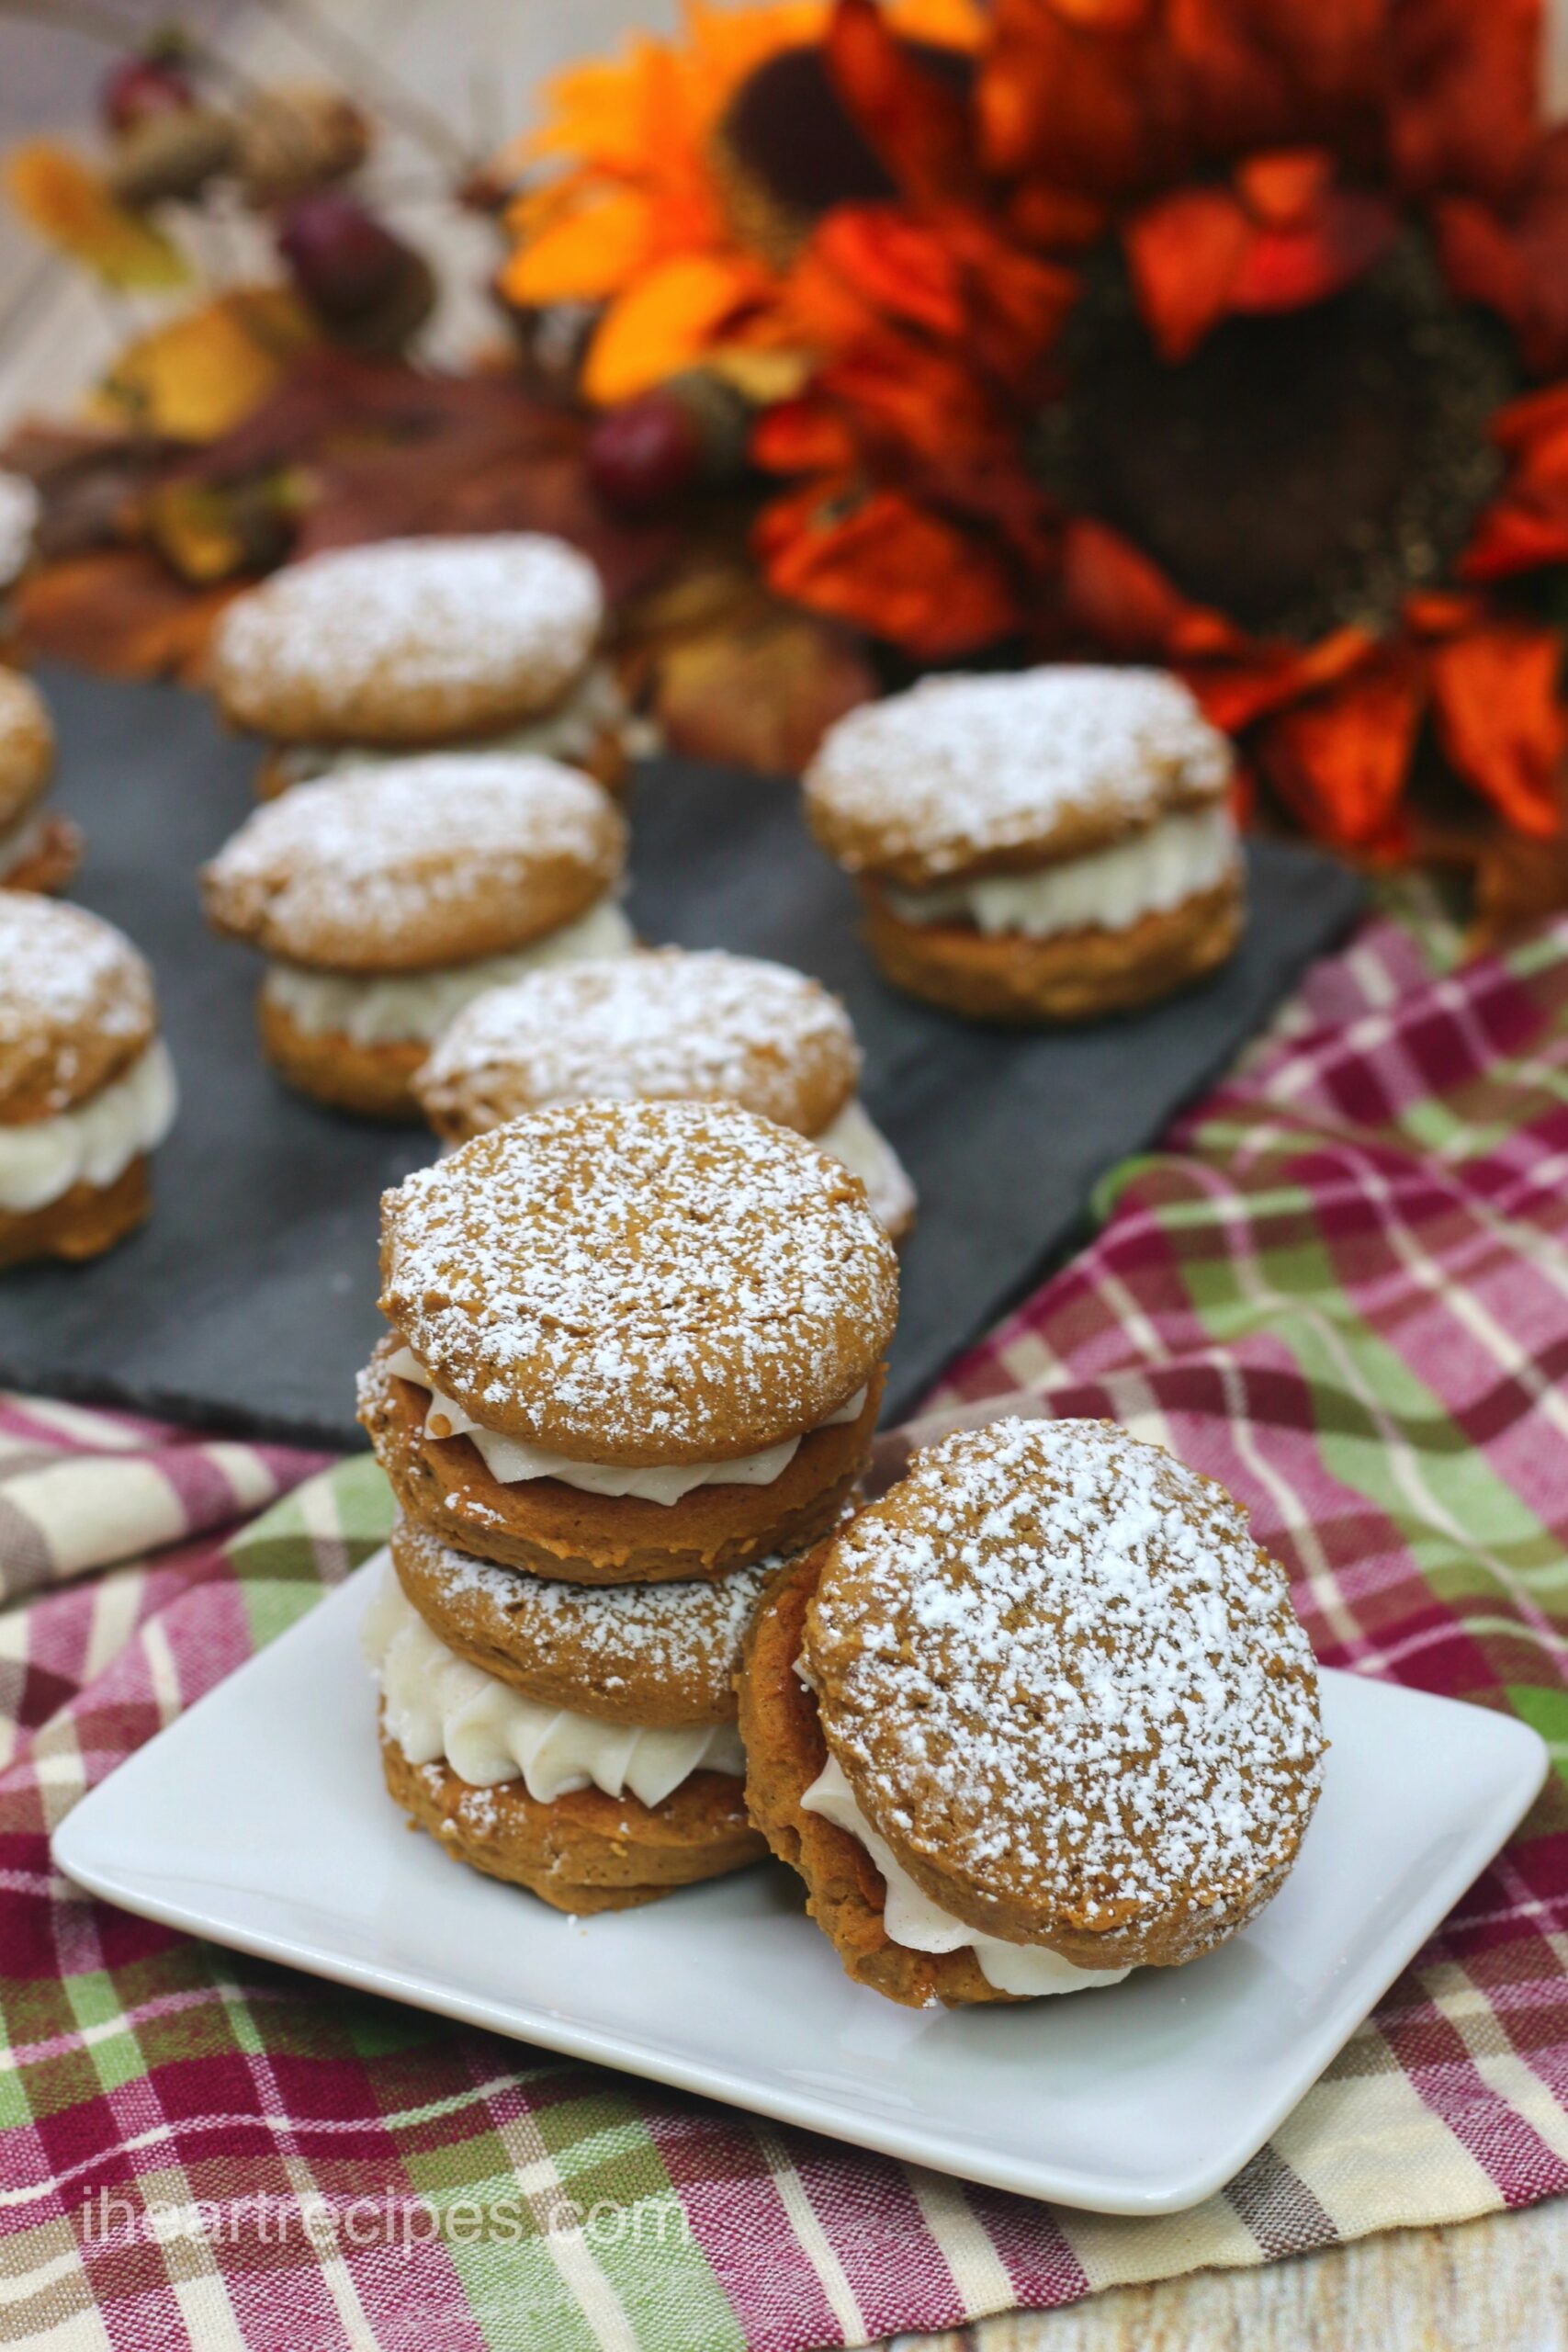 A batch of homemade pumpkin gingerbread whoopie pies sit on a platter, with three served on a small white square plate. The soft, cream-filled cookie sandwiches are dusted with powdered sugar.